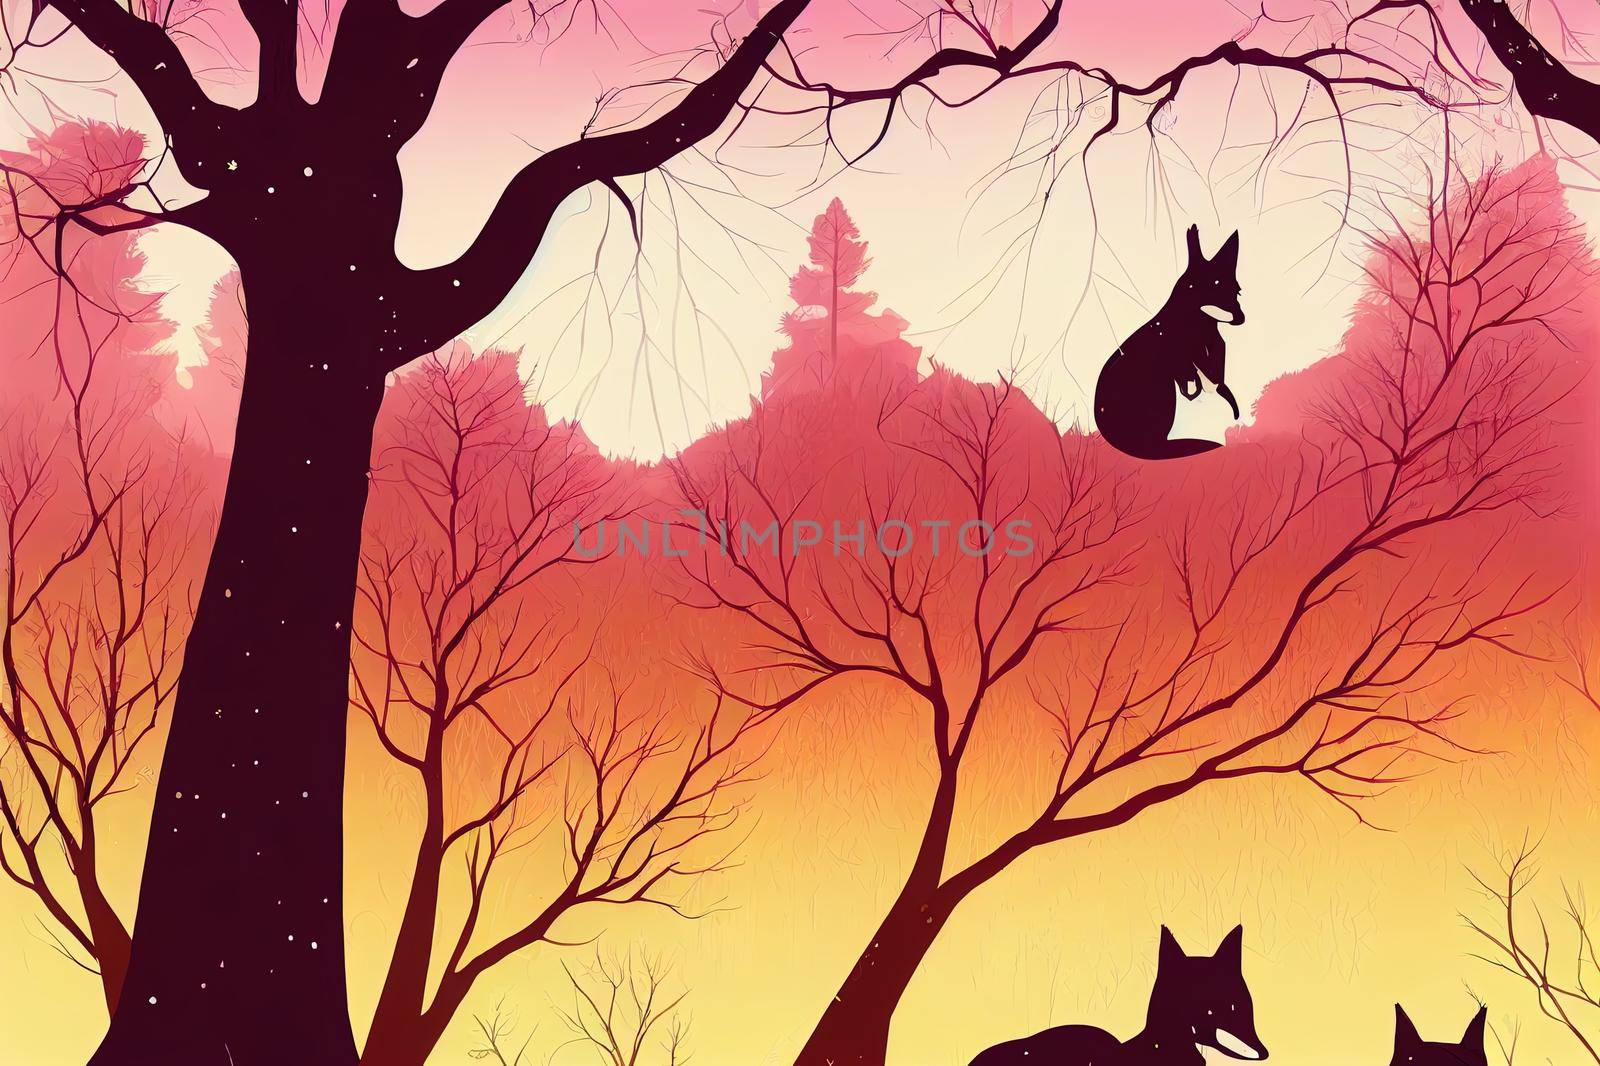 Horizontal banner of forest landscape. Fox and squirrel in magic misty forest. Silhouettes of trees and animals. Pink, orange, violet background, illustration. Bookmark.